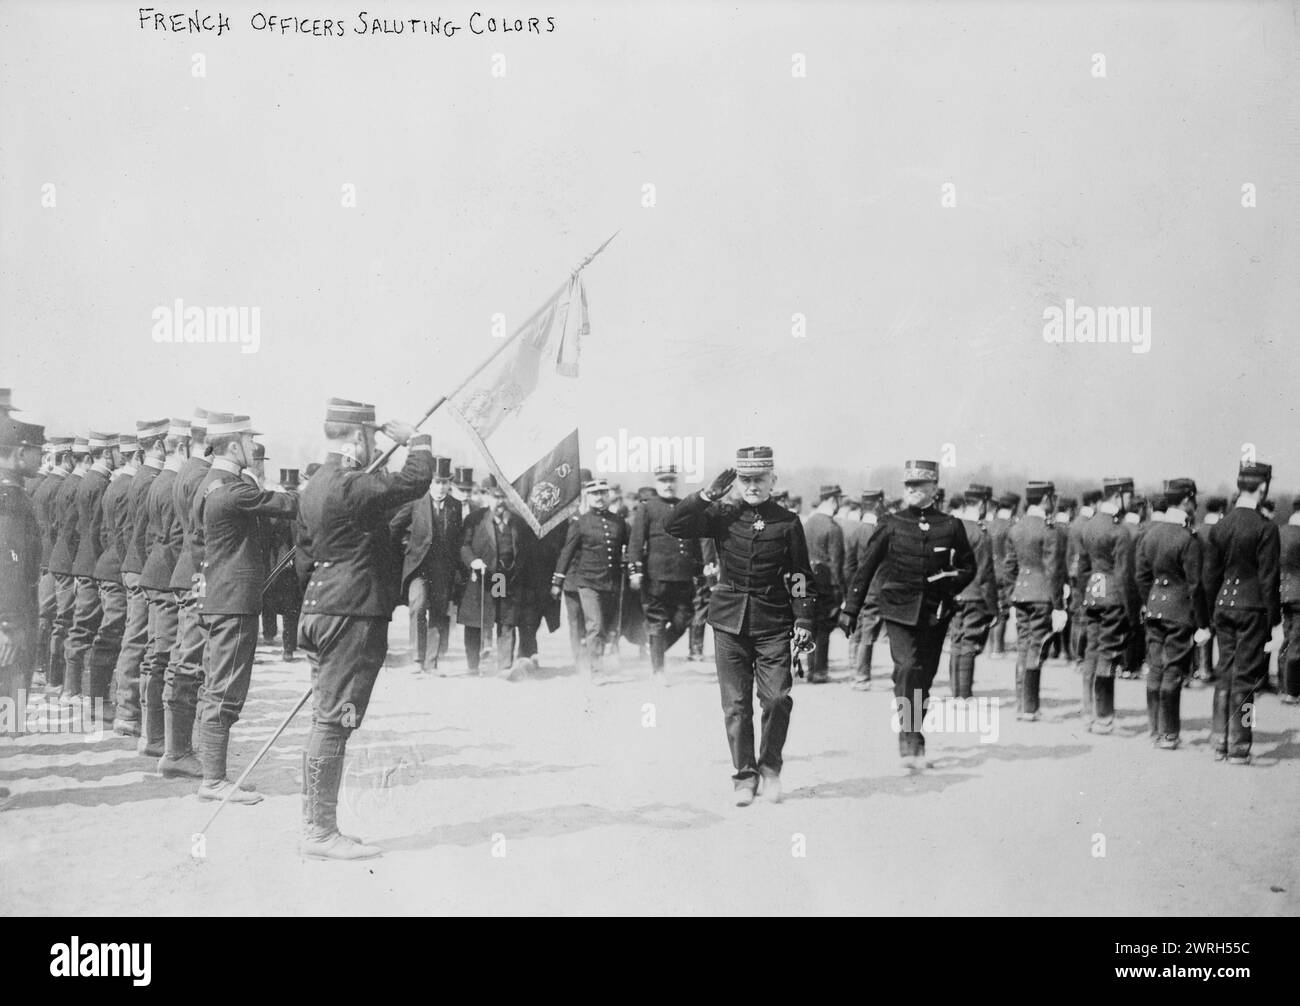 French officers saluting colors, between c1914 and c1915. Probably shows General Ferdinand Foch (1851-1929), who served in the French army during World War I. Stock Photo